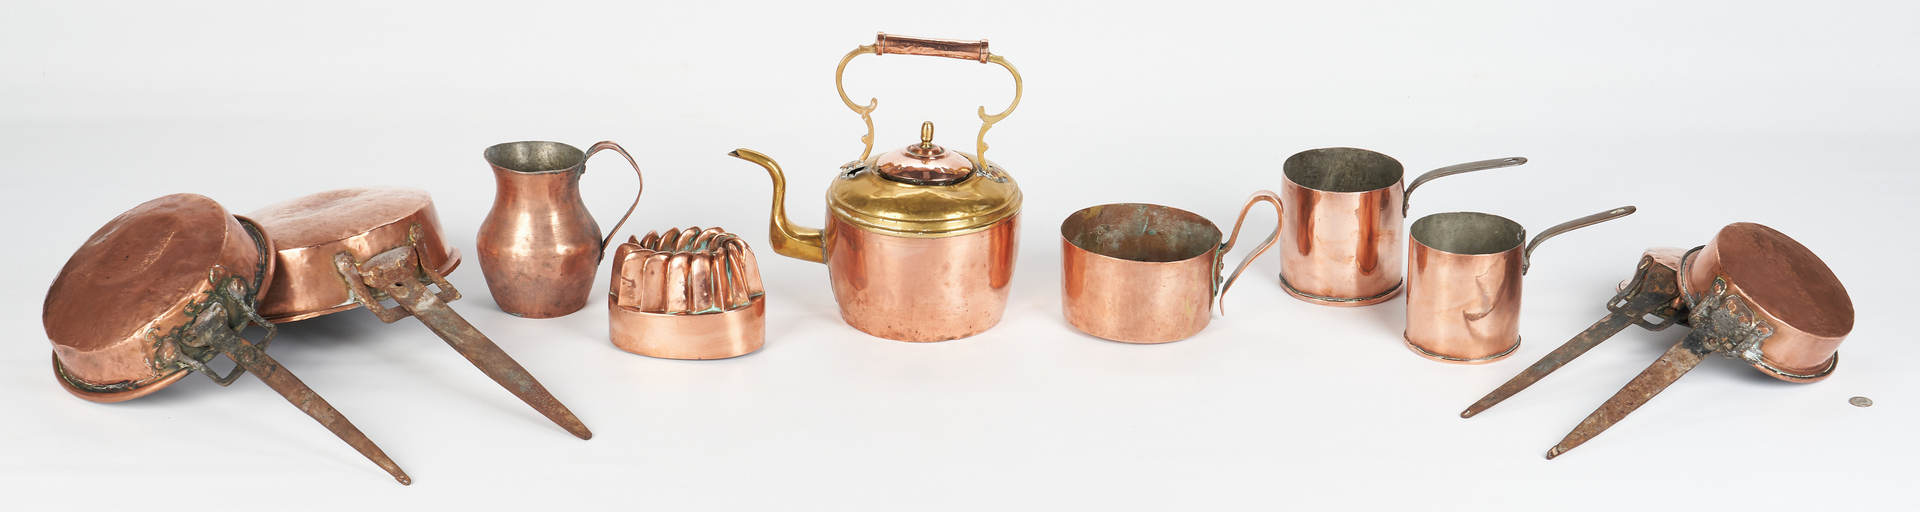 Lot 1049: 10 pcs. Early Copper Cookware inc. Signed